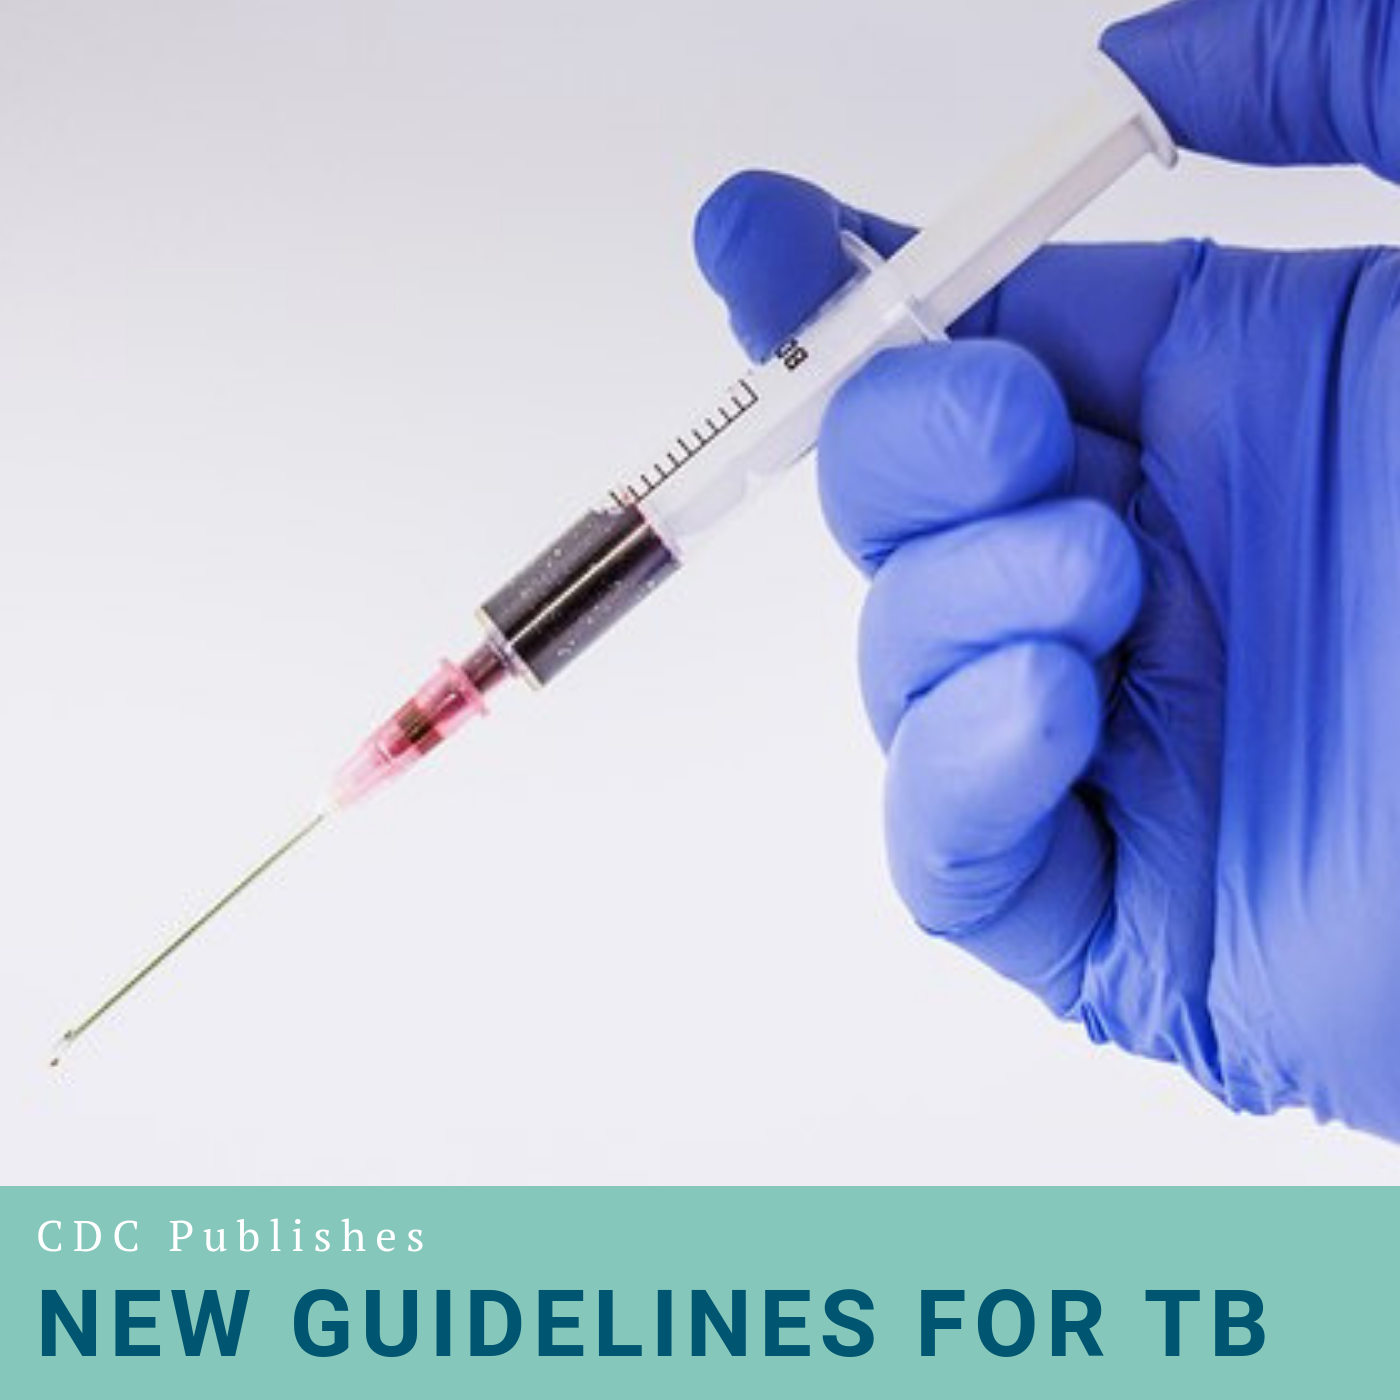 CDC Publishes New Guidelines for TB Image